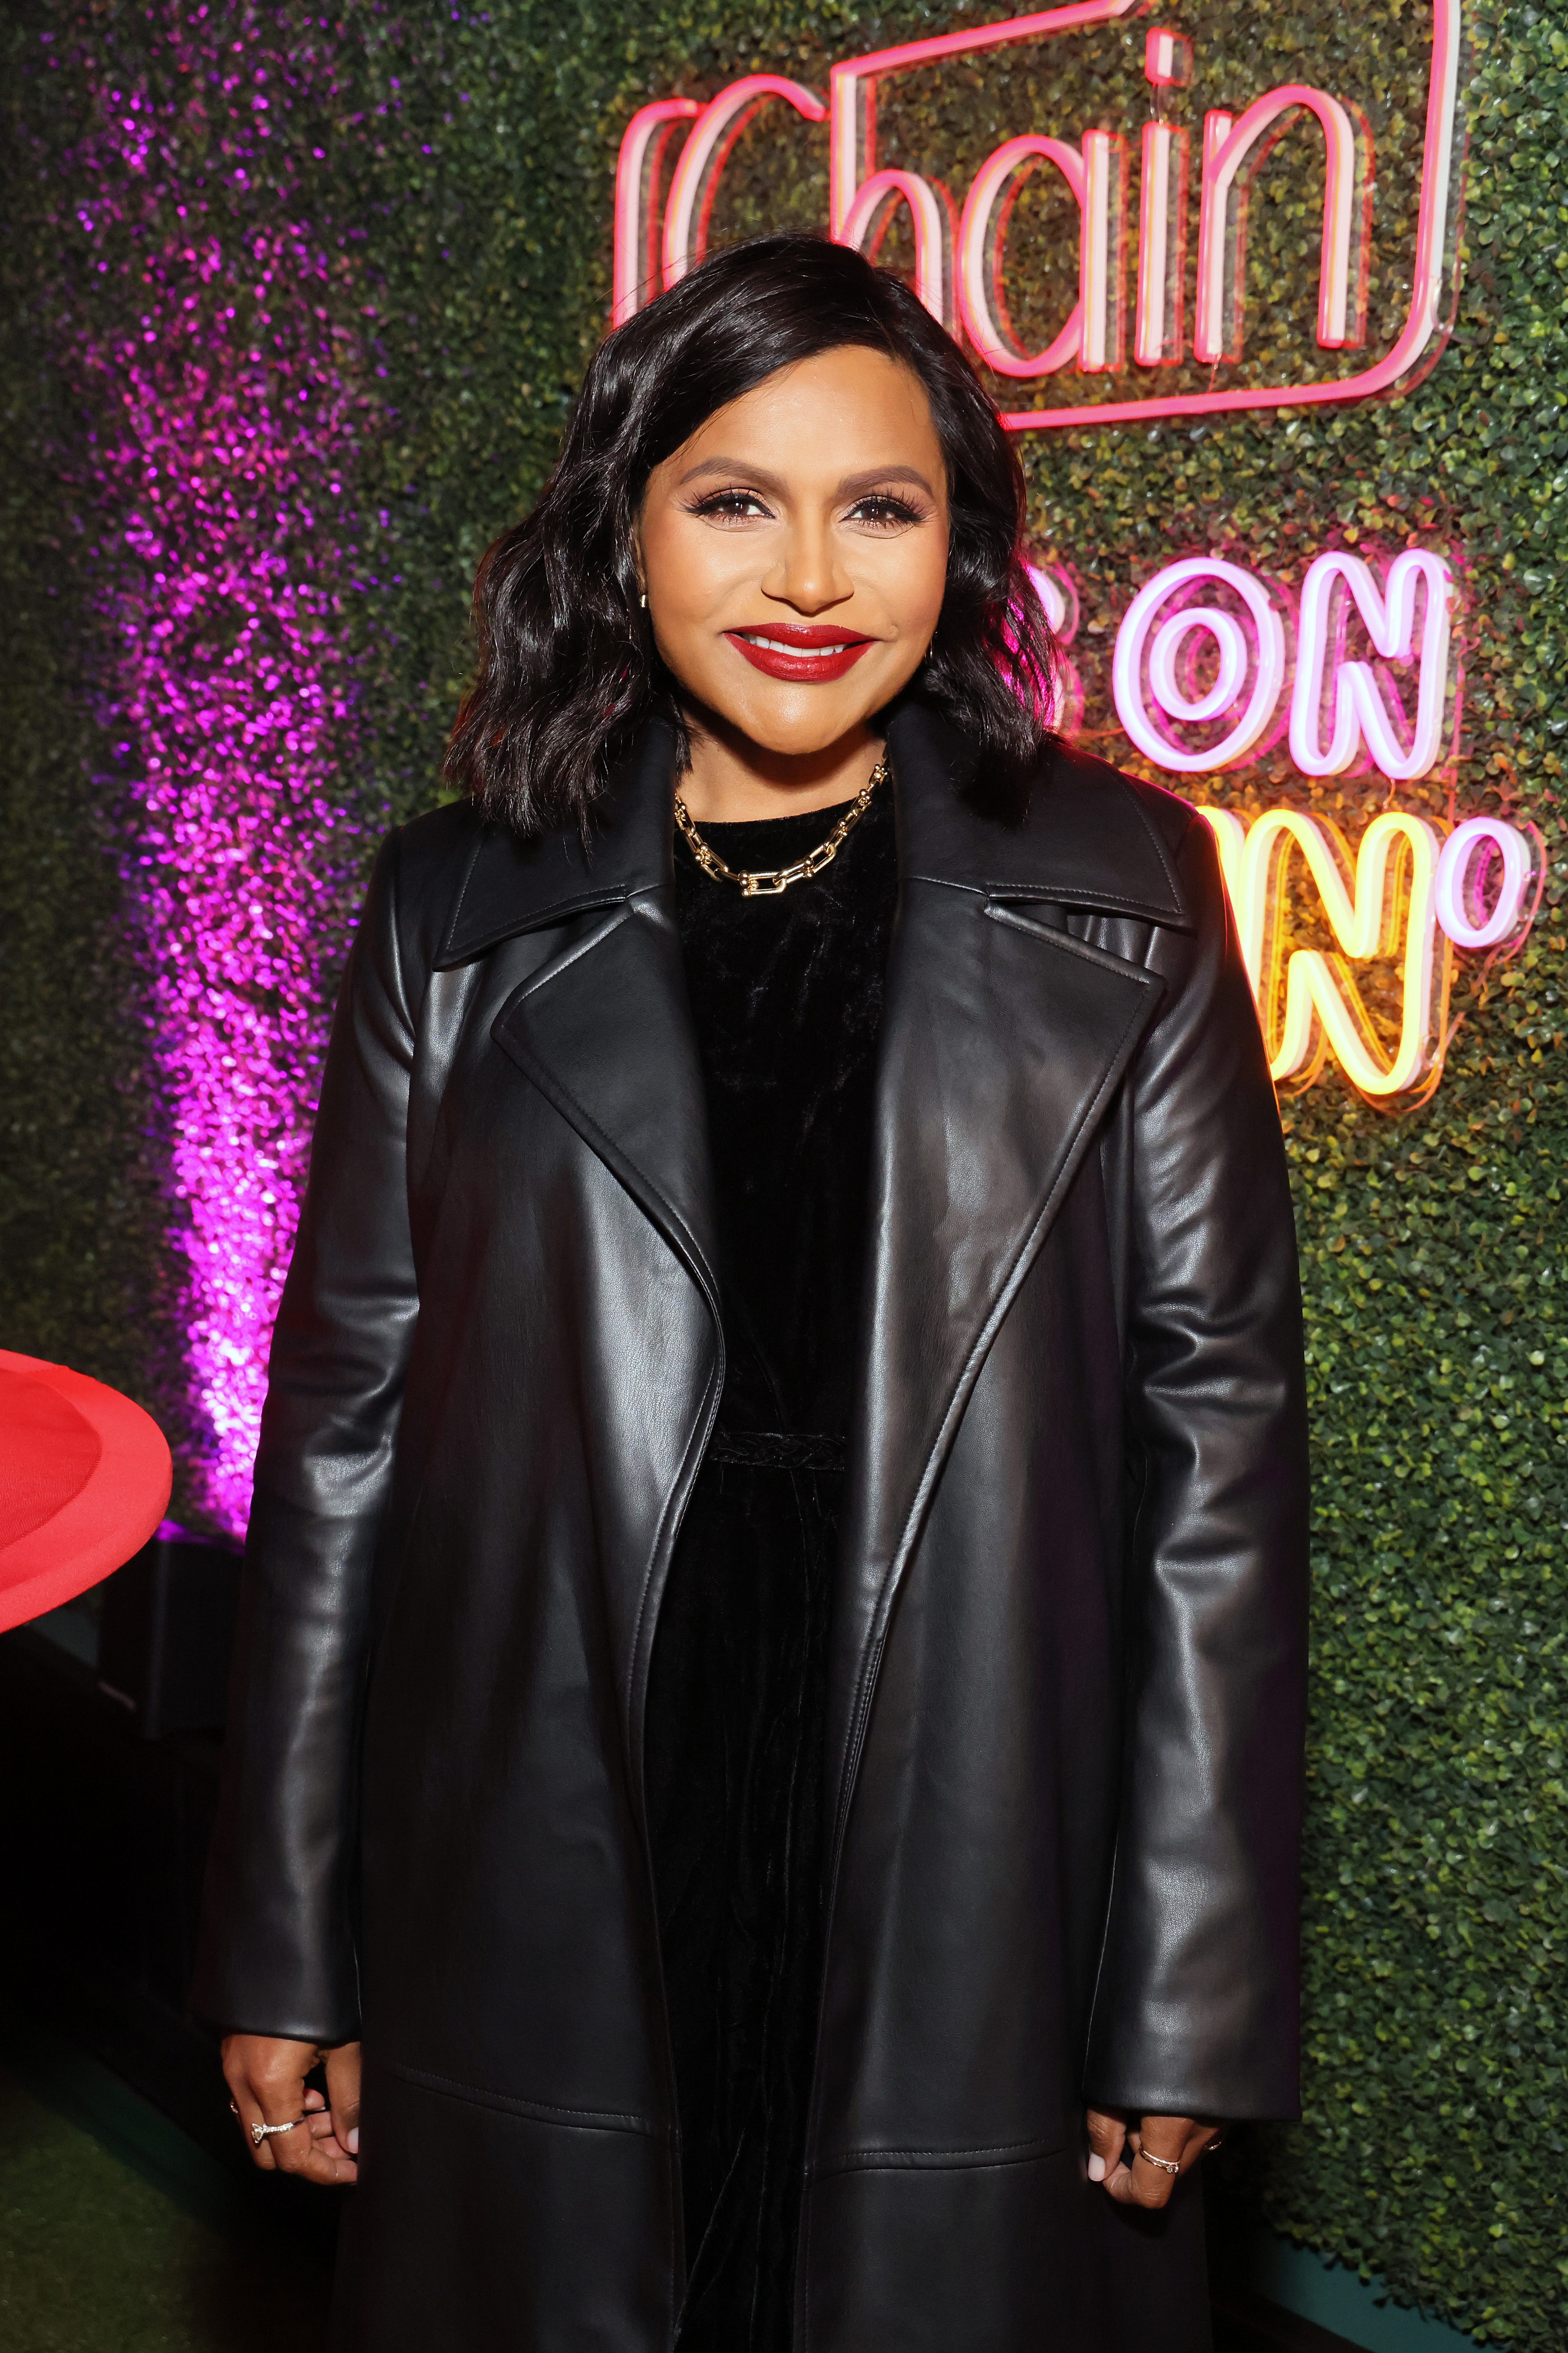 Mindy in a leather jacket and lace top at a &#x27;Chain of Events&#x27; backdrop